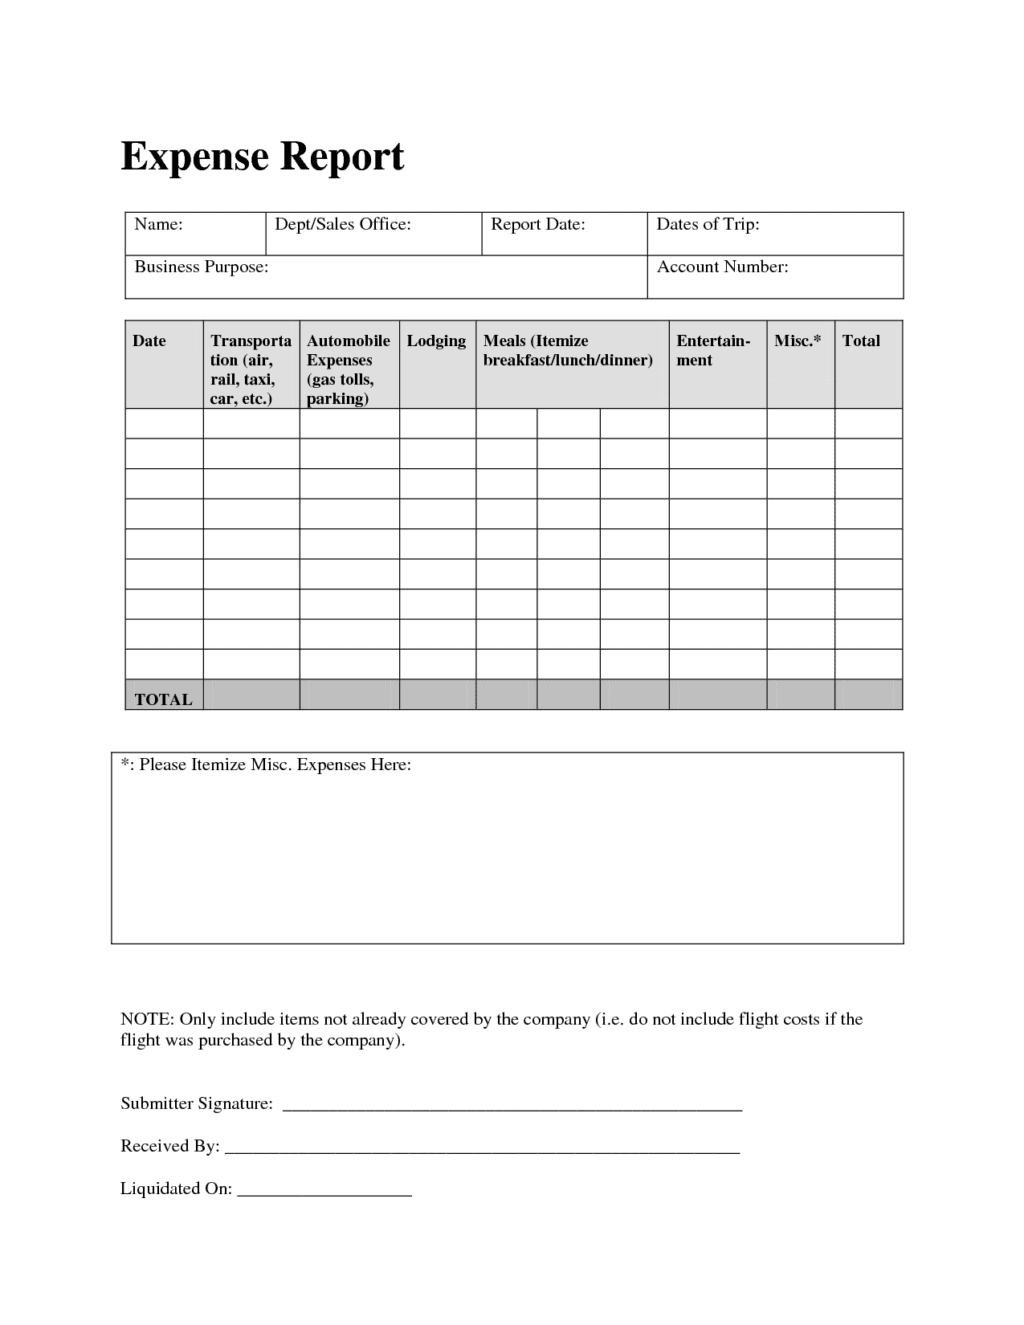 Expense Report Template Google Docs And Expense Report Template Multiple Currencies